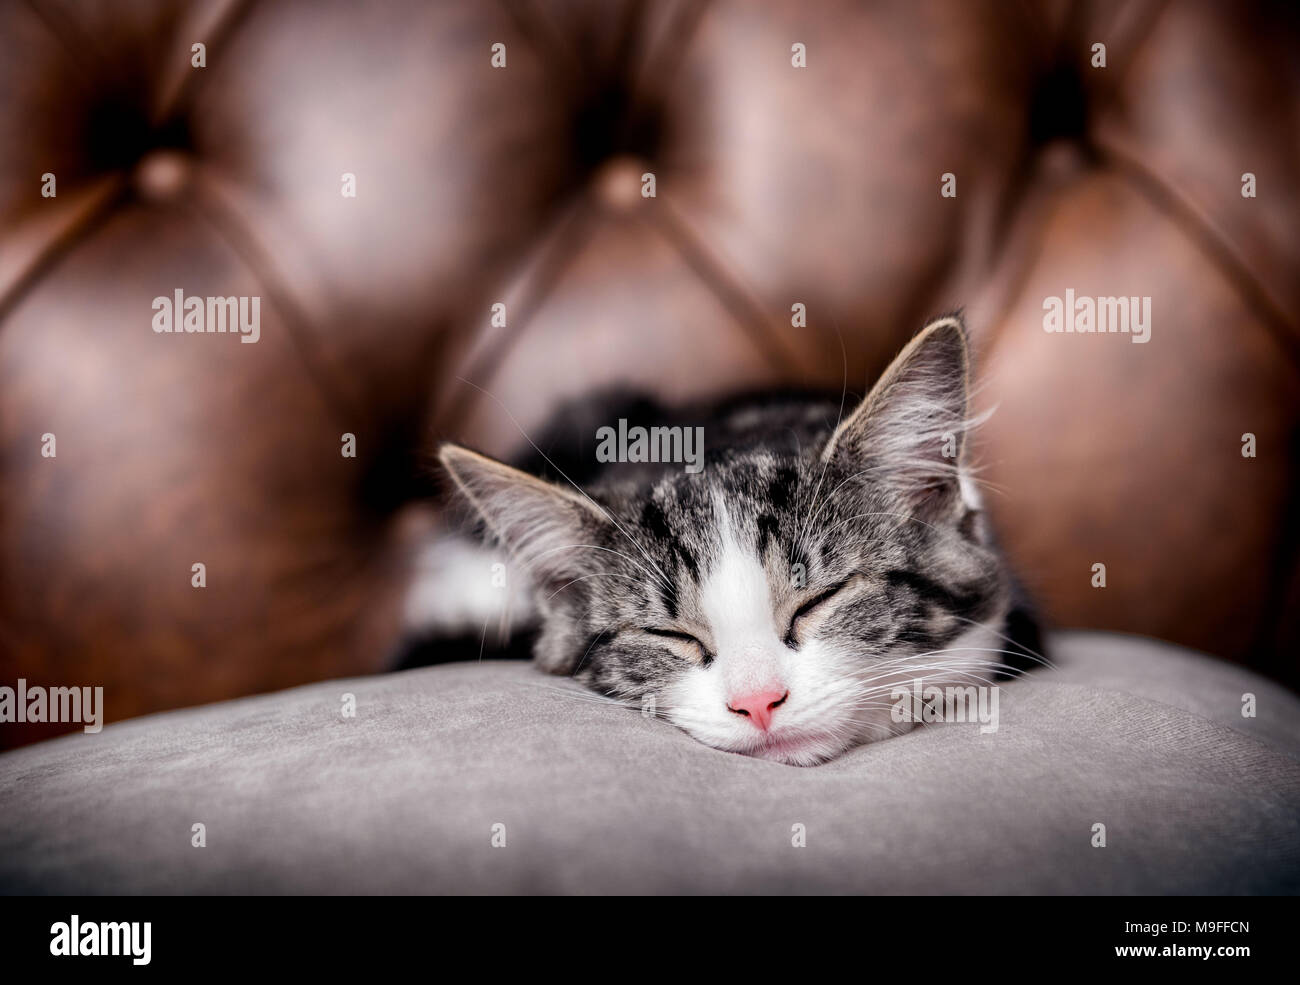 Cute kitten sleeping on a luxurious cushion with a leather background Stock Photo